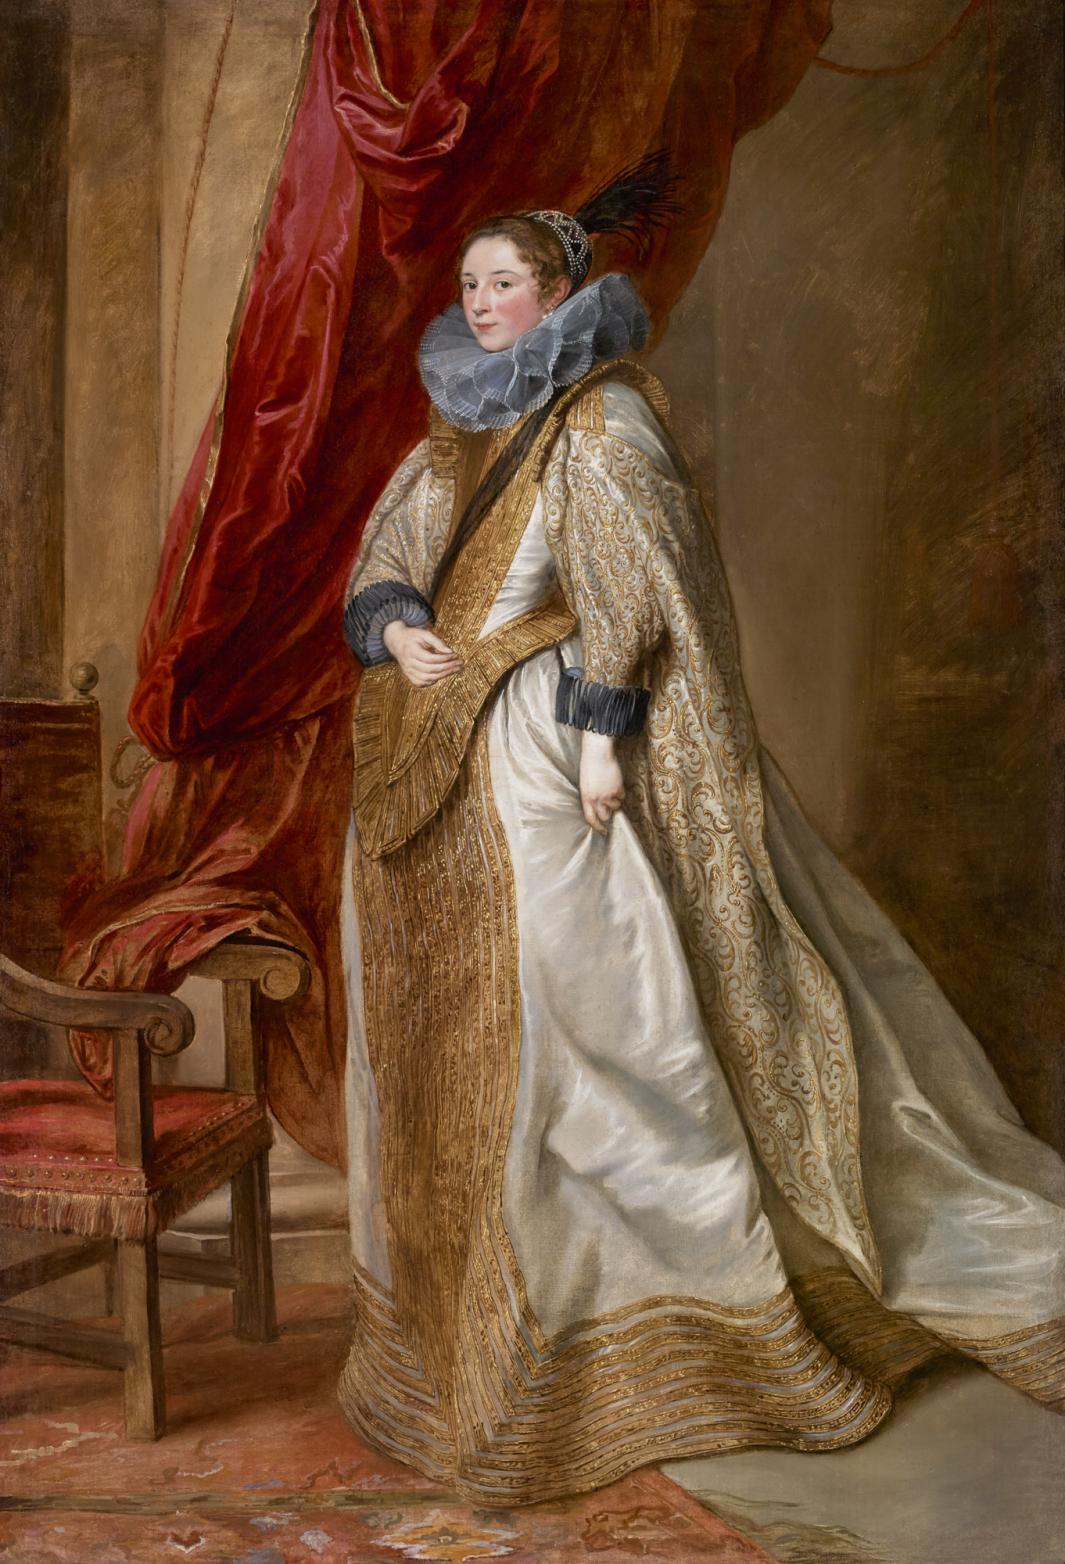 oil painting of woman standing in lavish gold and white dress with large blue collar, next to red curtain and chair